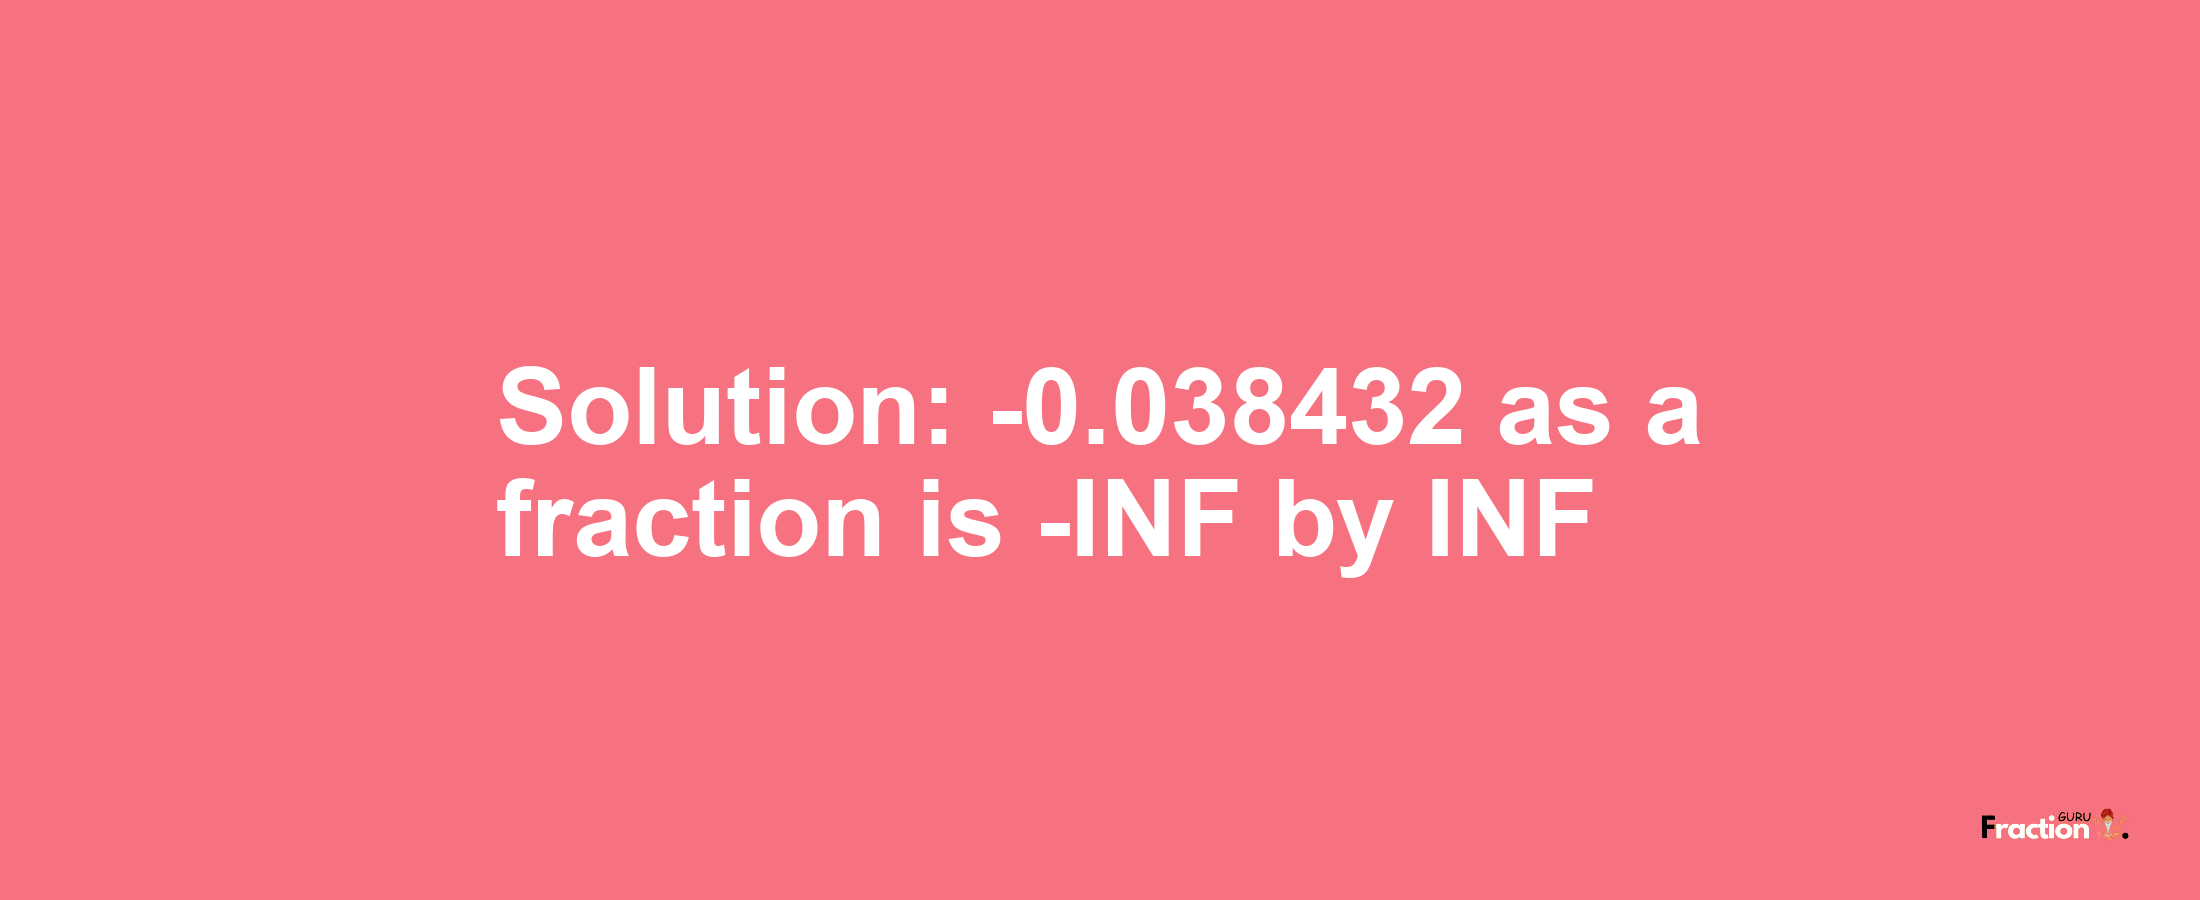 Solution:-0.038432 as a fraction is -INF/INF